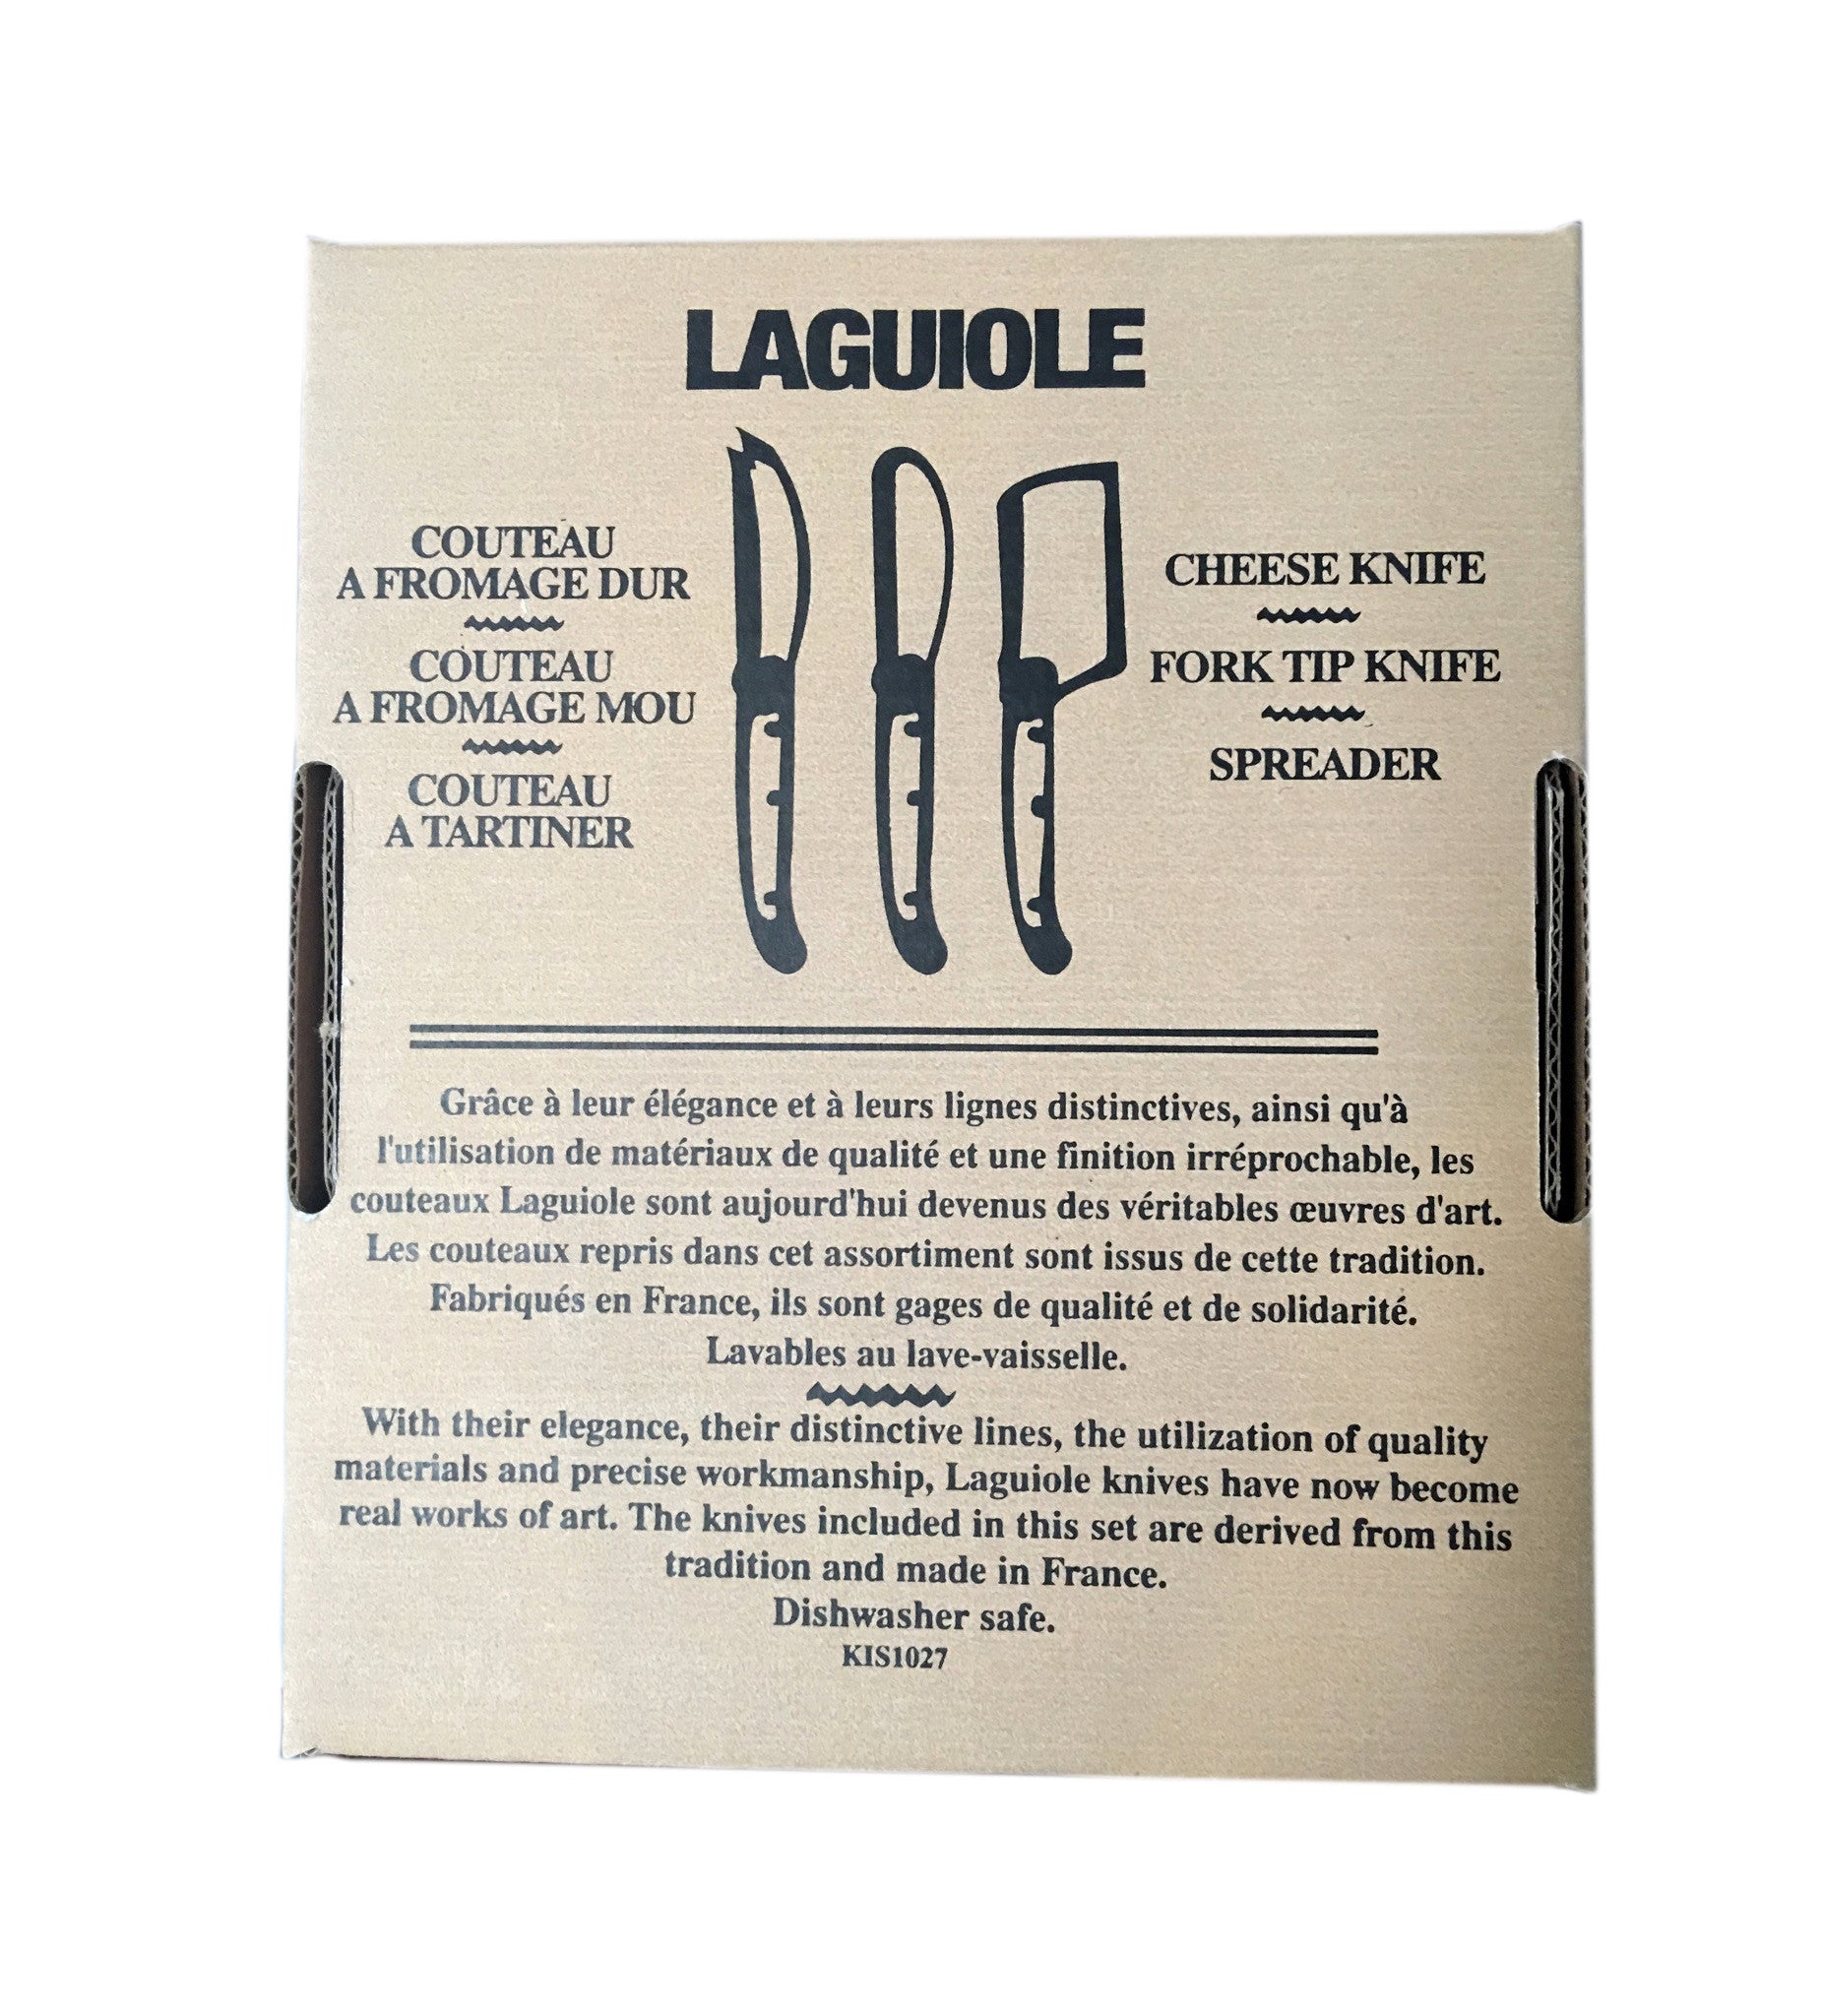 Laguiole Black Mini Cheese Set (Cutter, Spreader, Fork Tipped Knife) in Brown Box (Set of 3) Cutlery Set Laguiole Brand_Laguiole Gift Sets Kitchen_Dinnerware Kitchen_Kitchenware Knife Sets Laguiole Mini Cheese Sets Spring Collection mini_cheese_back_of_box_2d479fe0-b6a4-4d71-991d-f490e32b25b7